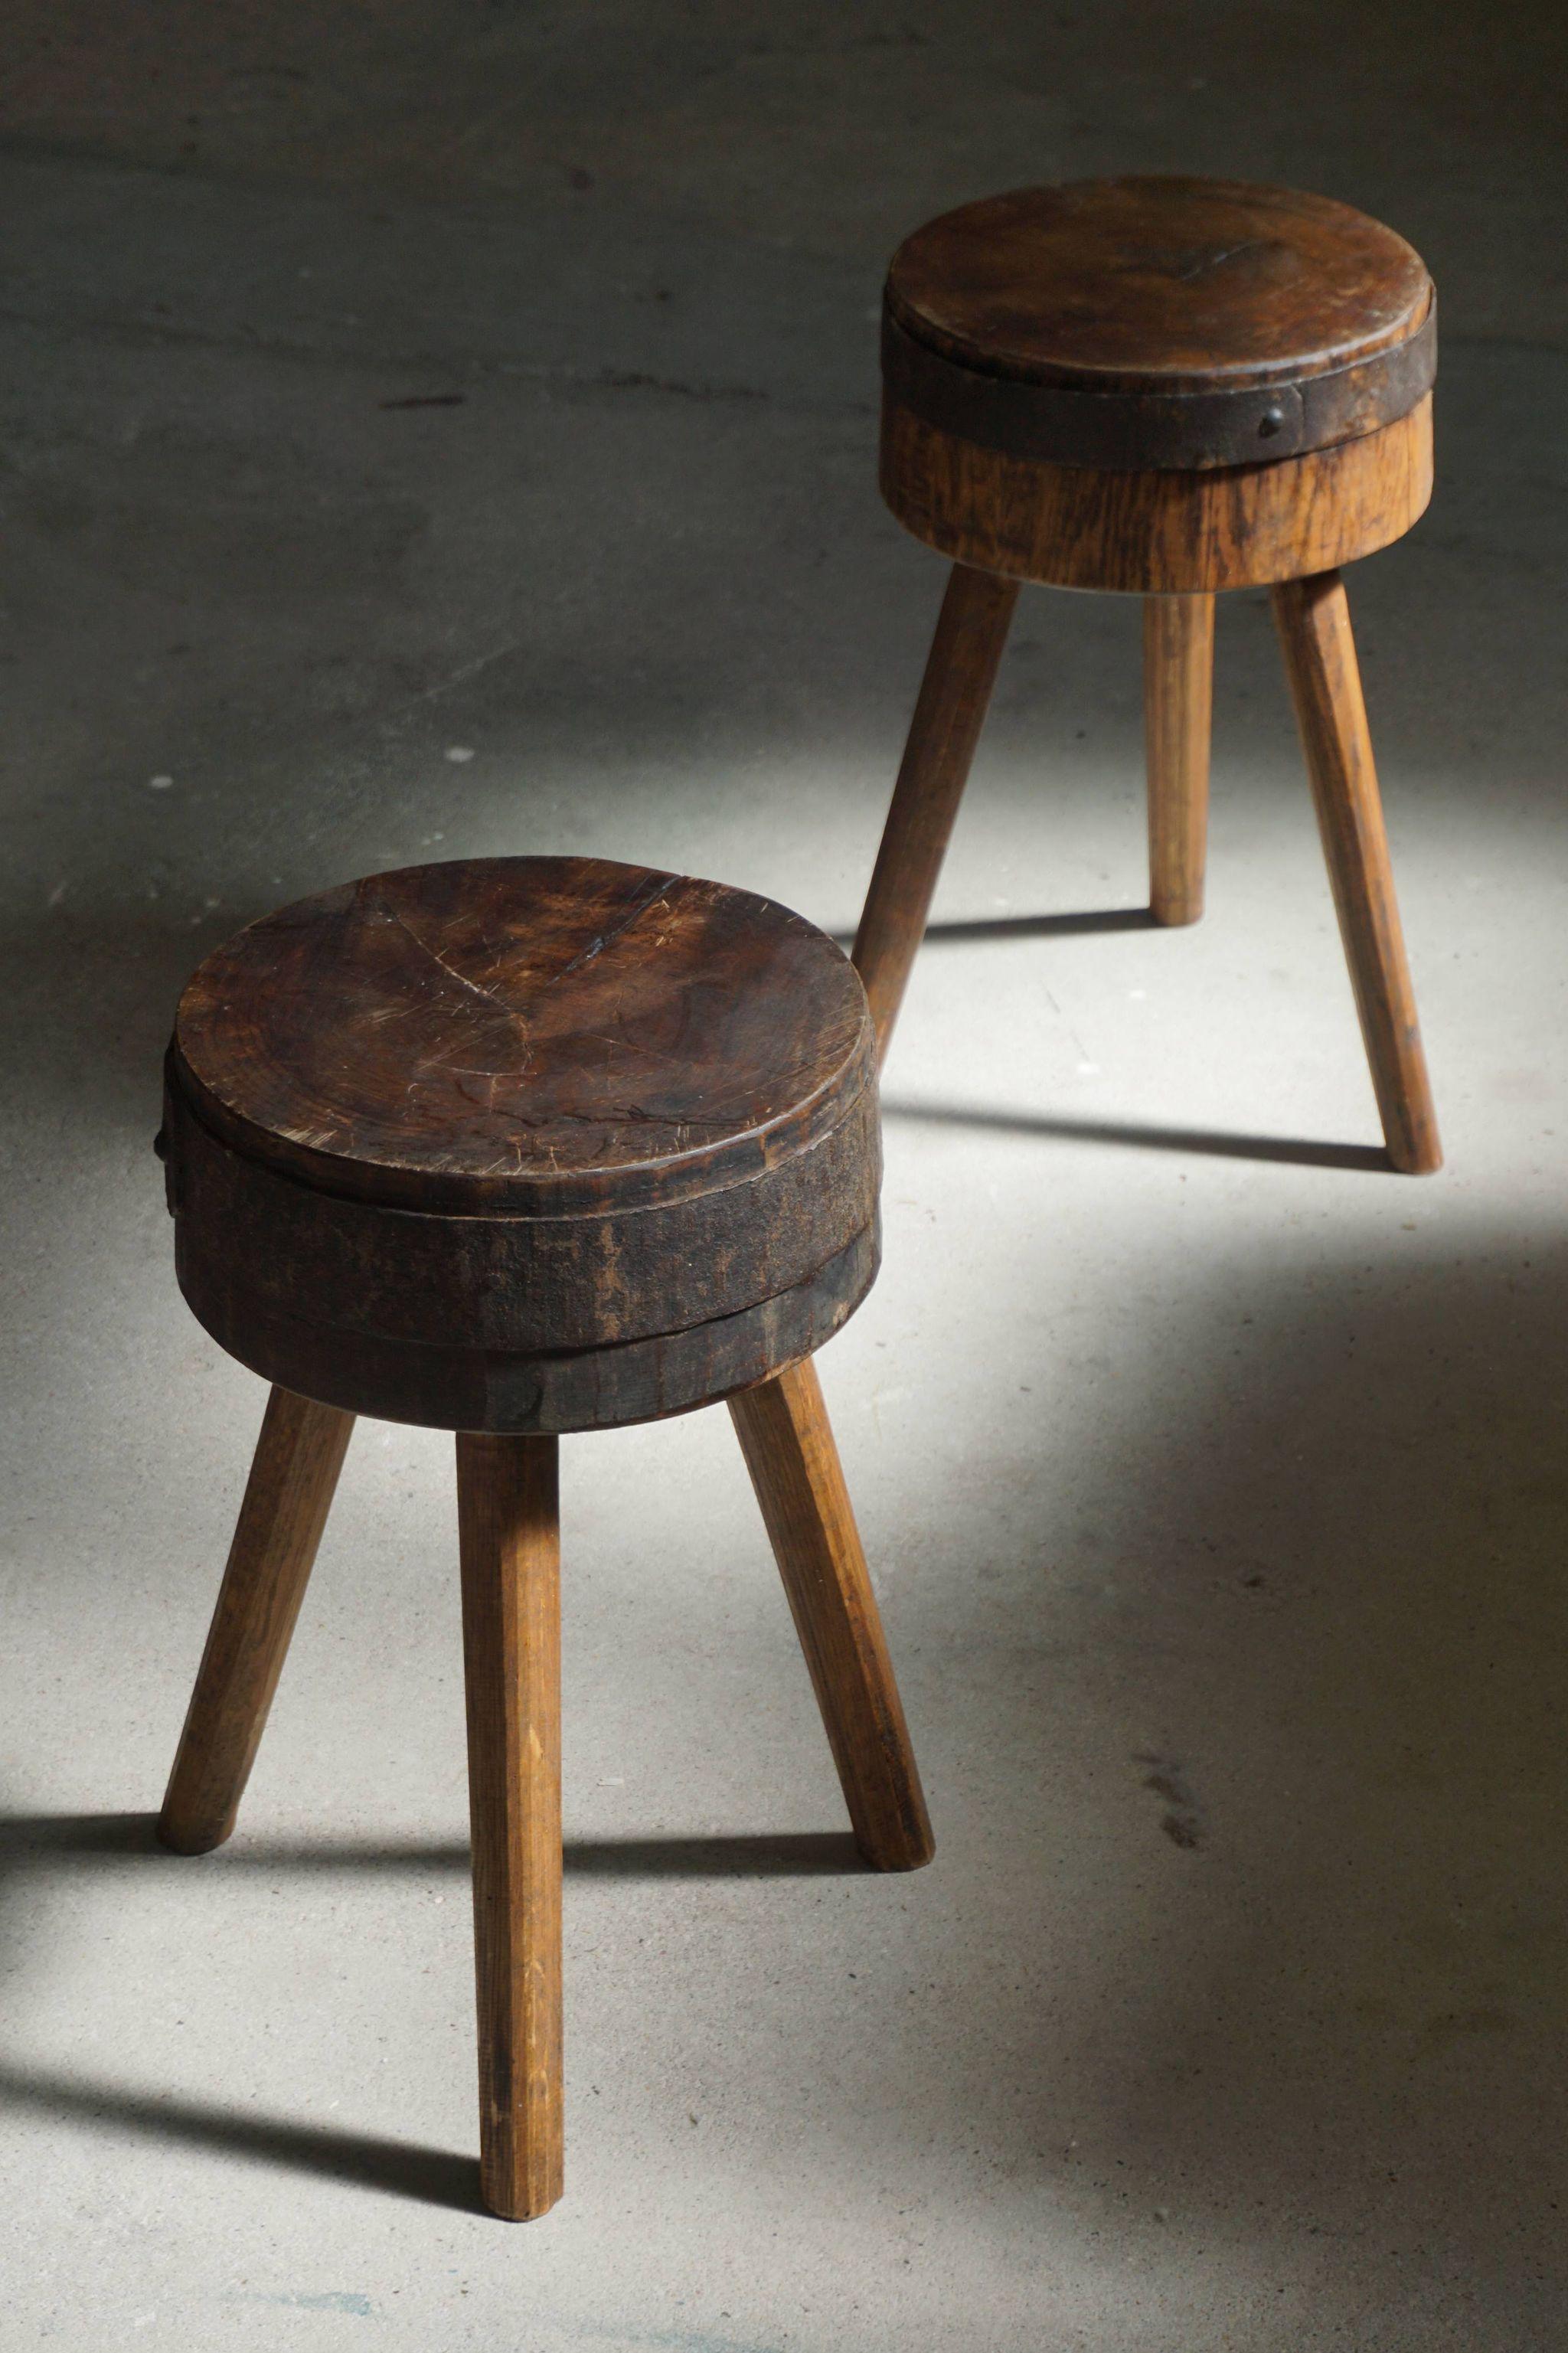 A pair of Swedish stools in solid wood with an iron fitting, early 20th century. 

- Brutalist, rustic design.